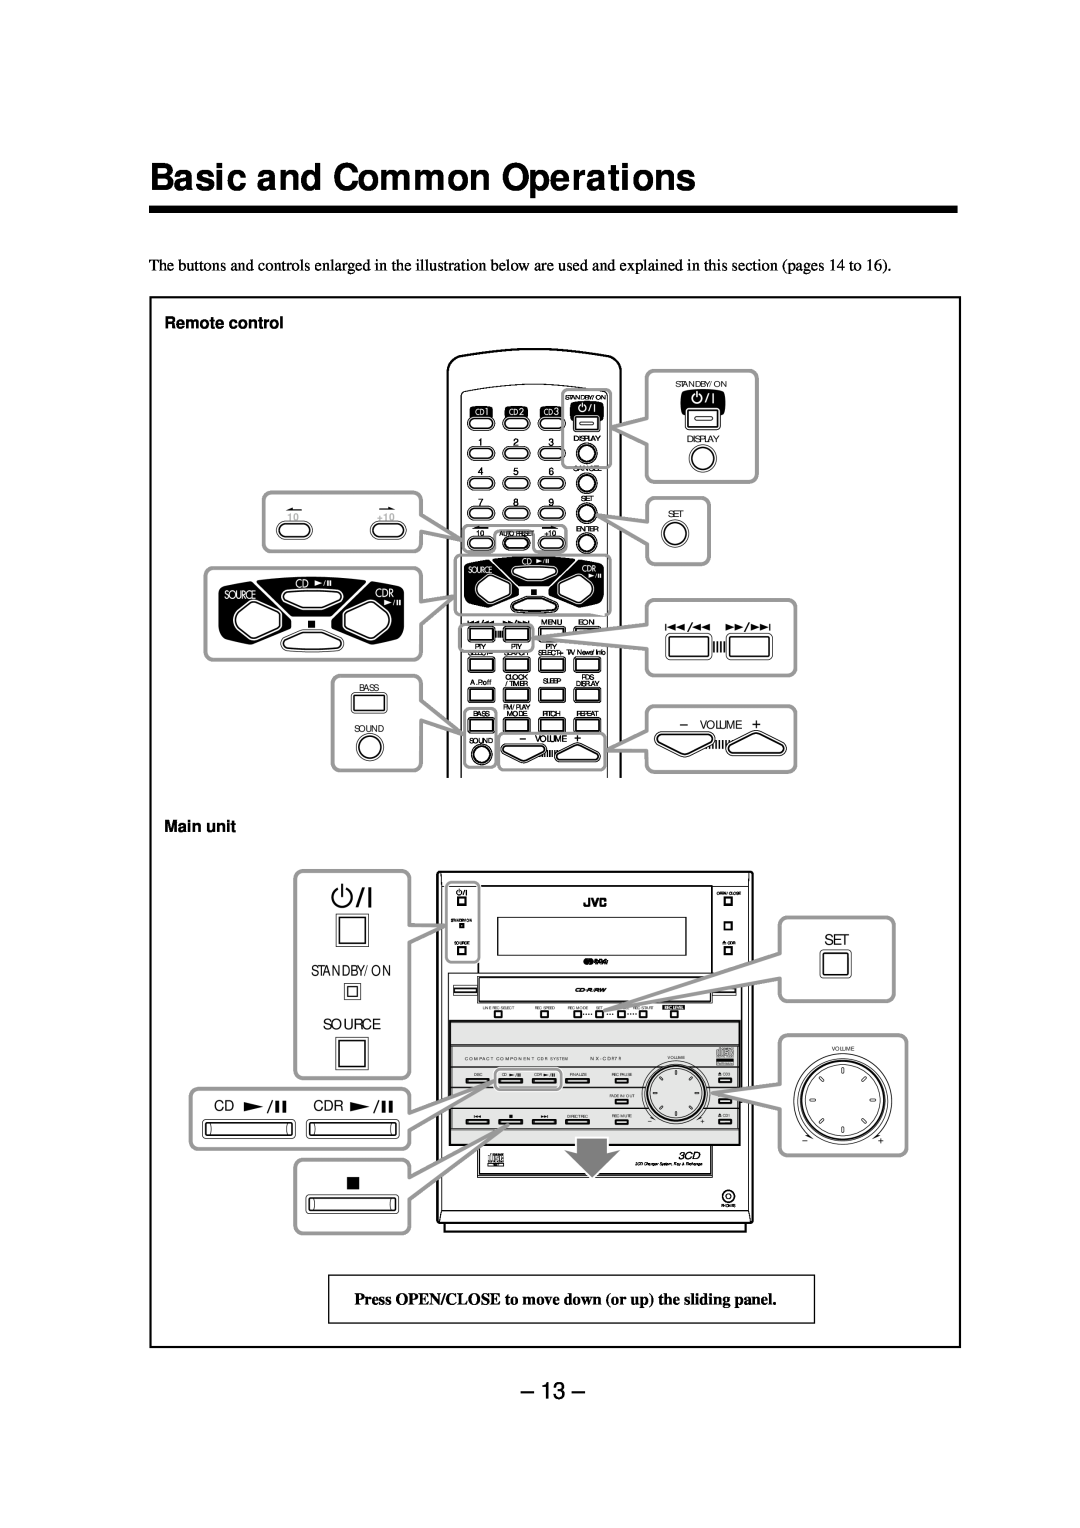 JVC LVT0749-003A, CA-NXCDR7R manual Basic and Common Operations, Remote control, Main unit 